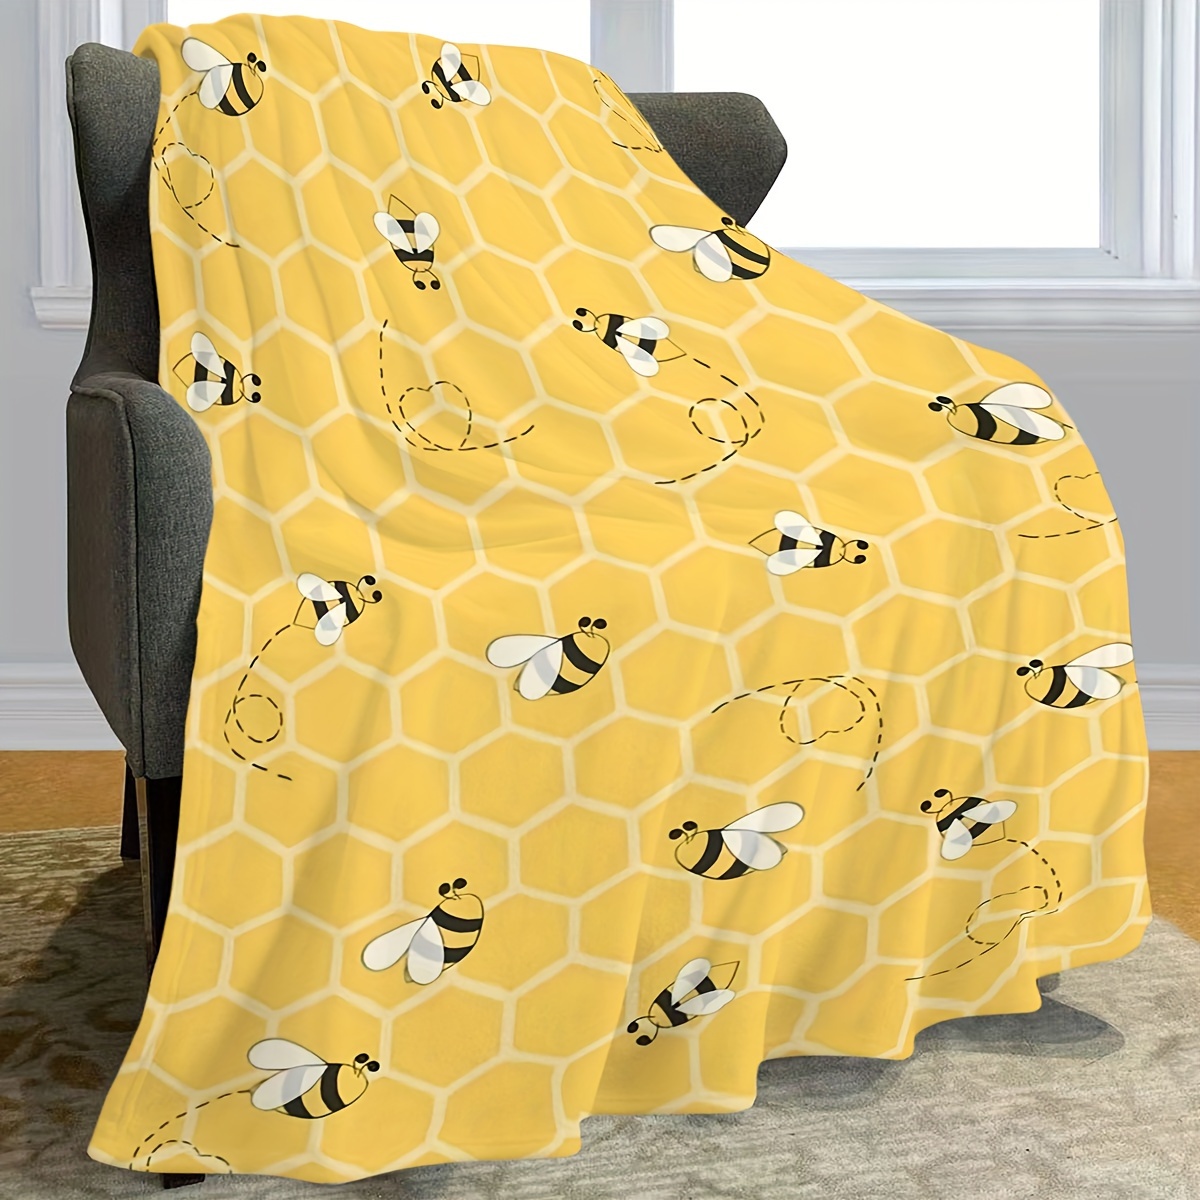 

Contemporary Geometric Honeycomb And Bee Patterned Throw Blanket - All-season Knitted Polyester Throw For Office Naps, Casual Vintage-style Hanging Tapestry